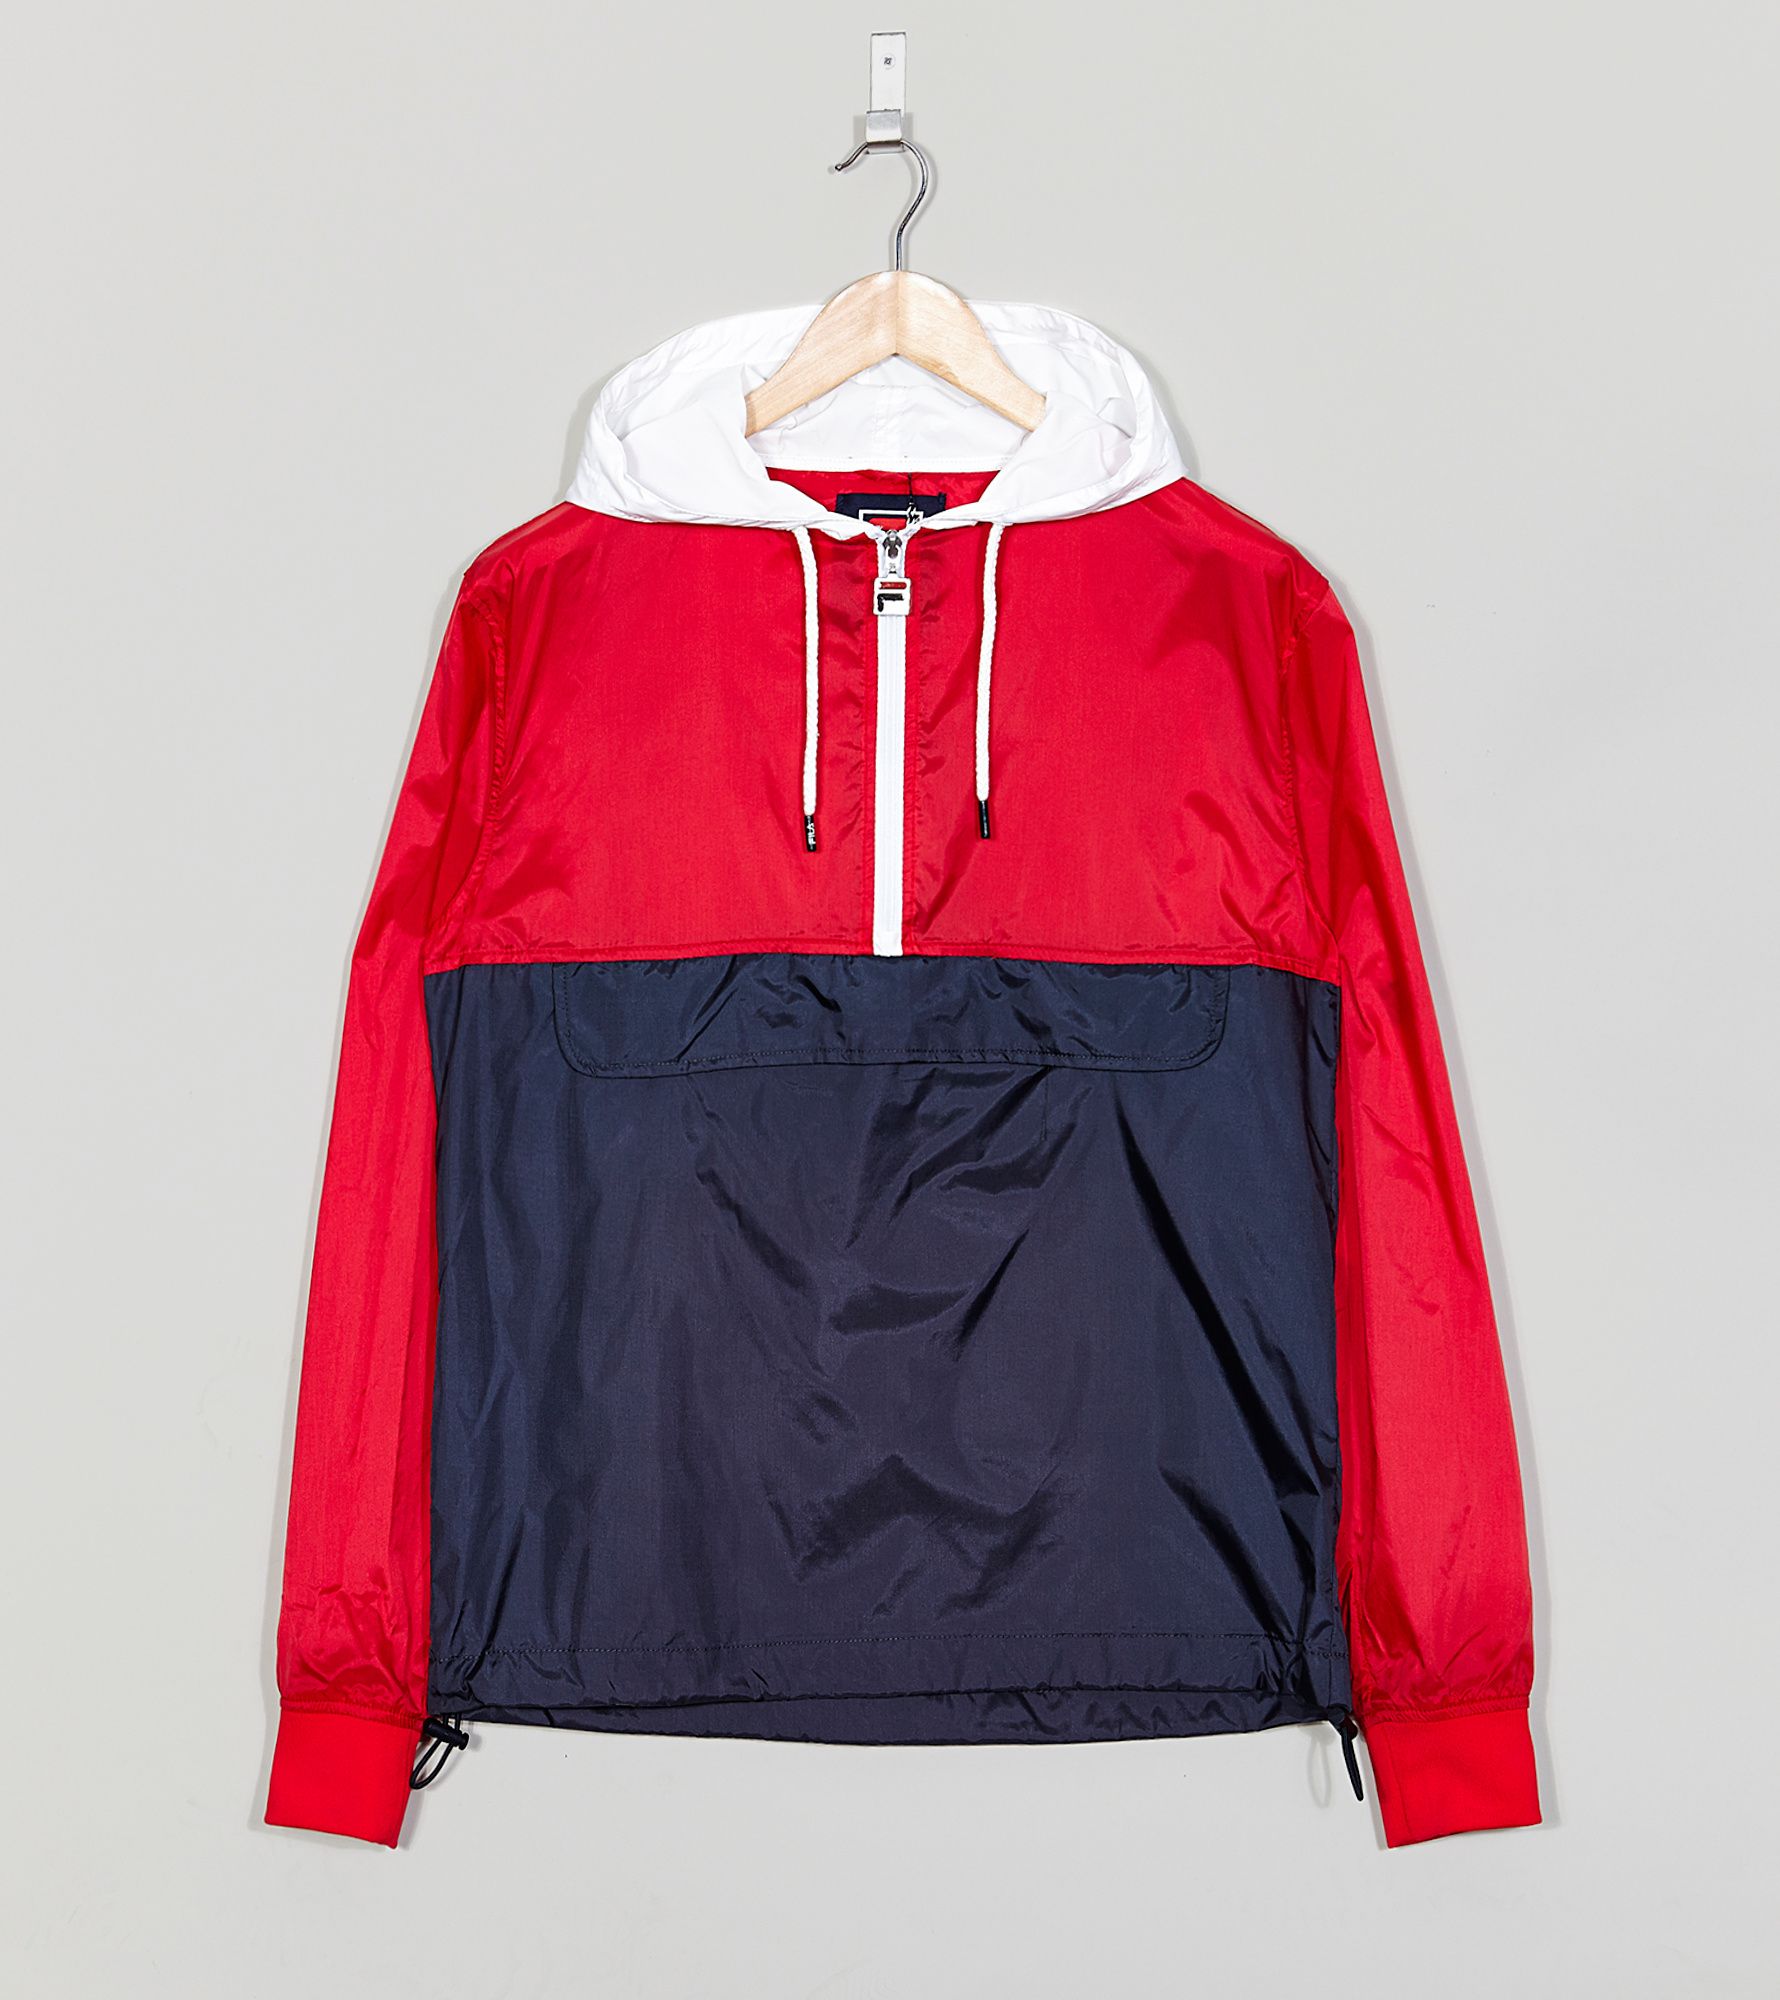 Fila Calabria Overhead Jacket - size? Exclusive | Size?